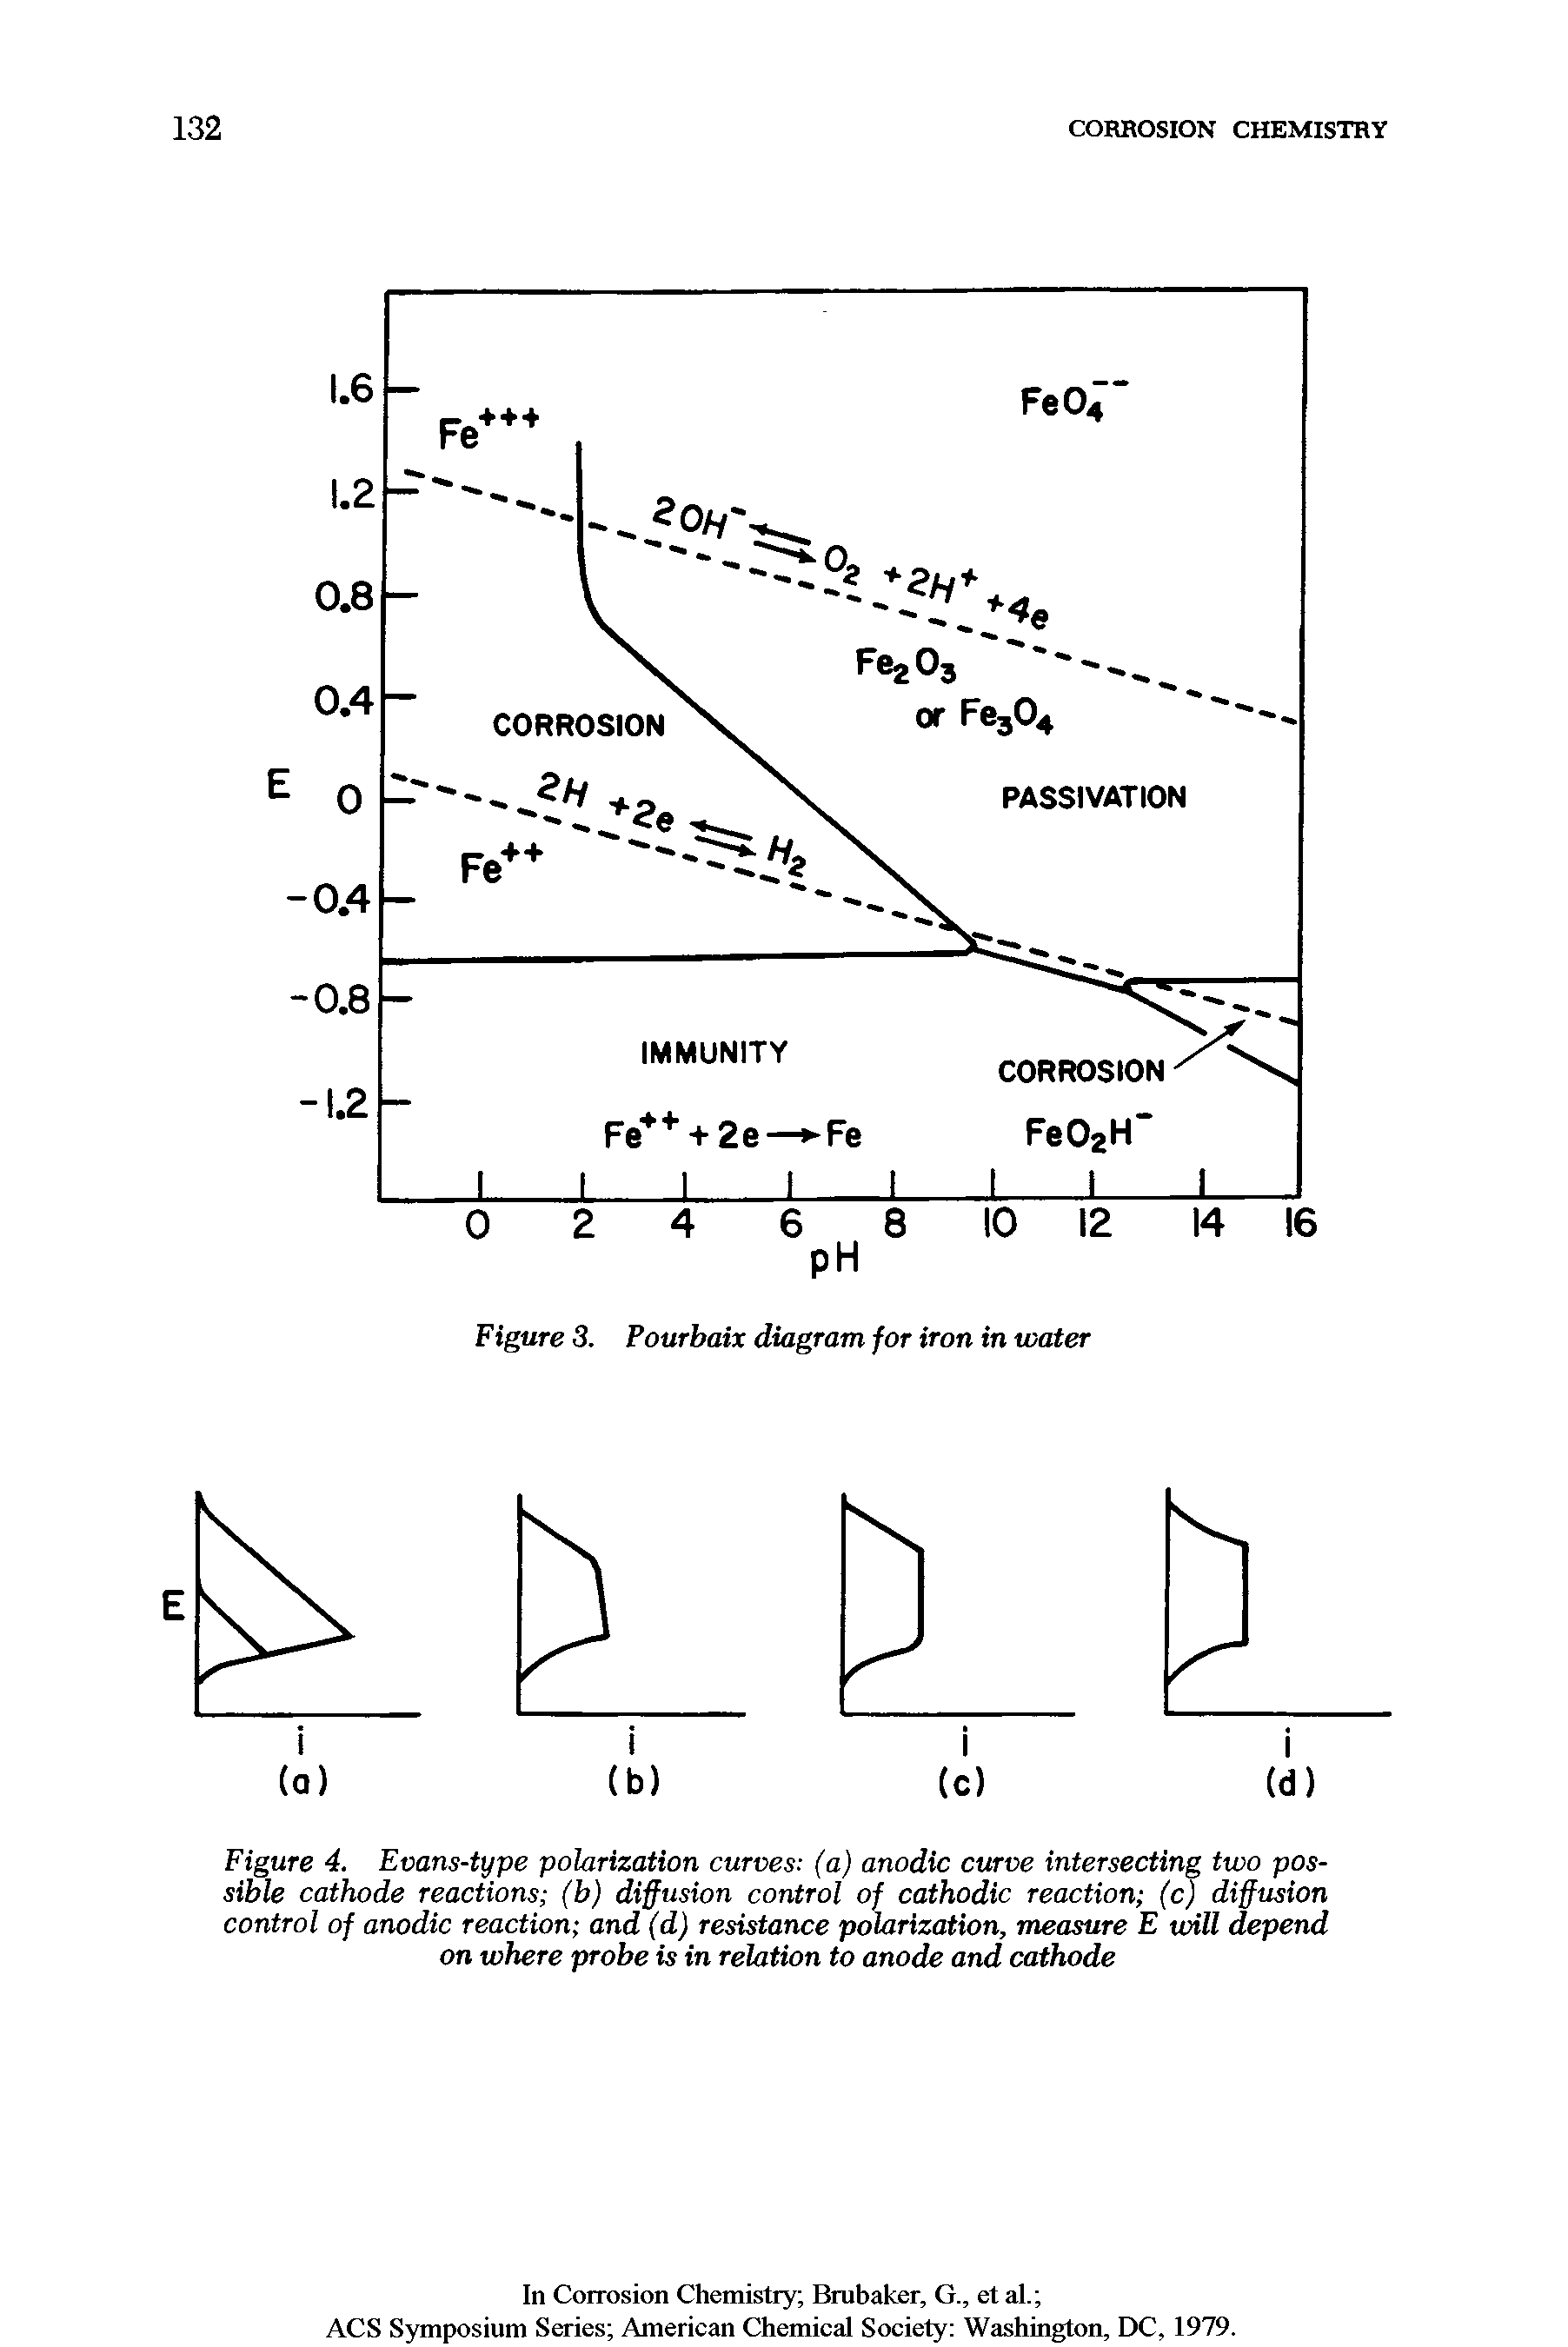 Figure 4. Evans-type polarization curves (a) anodic curve intersecting two possible cathode reactions (b) diffusion control of cathodic reaction (c) diffusion control of anodic reaction and (d) resistance polarization, measure E will depend on where probe is in relation to anode and cathode...